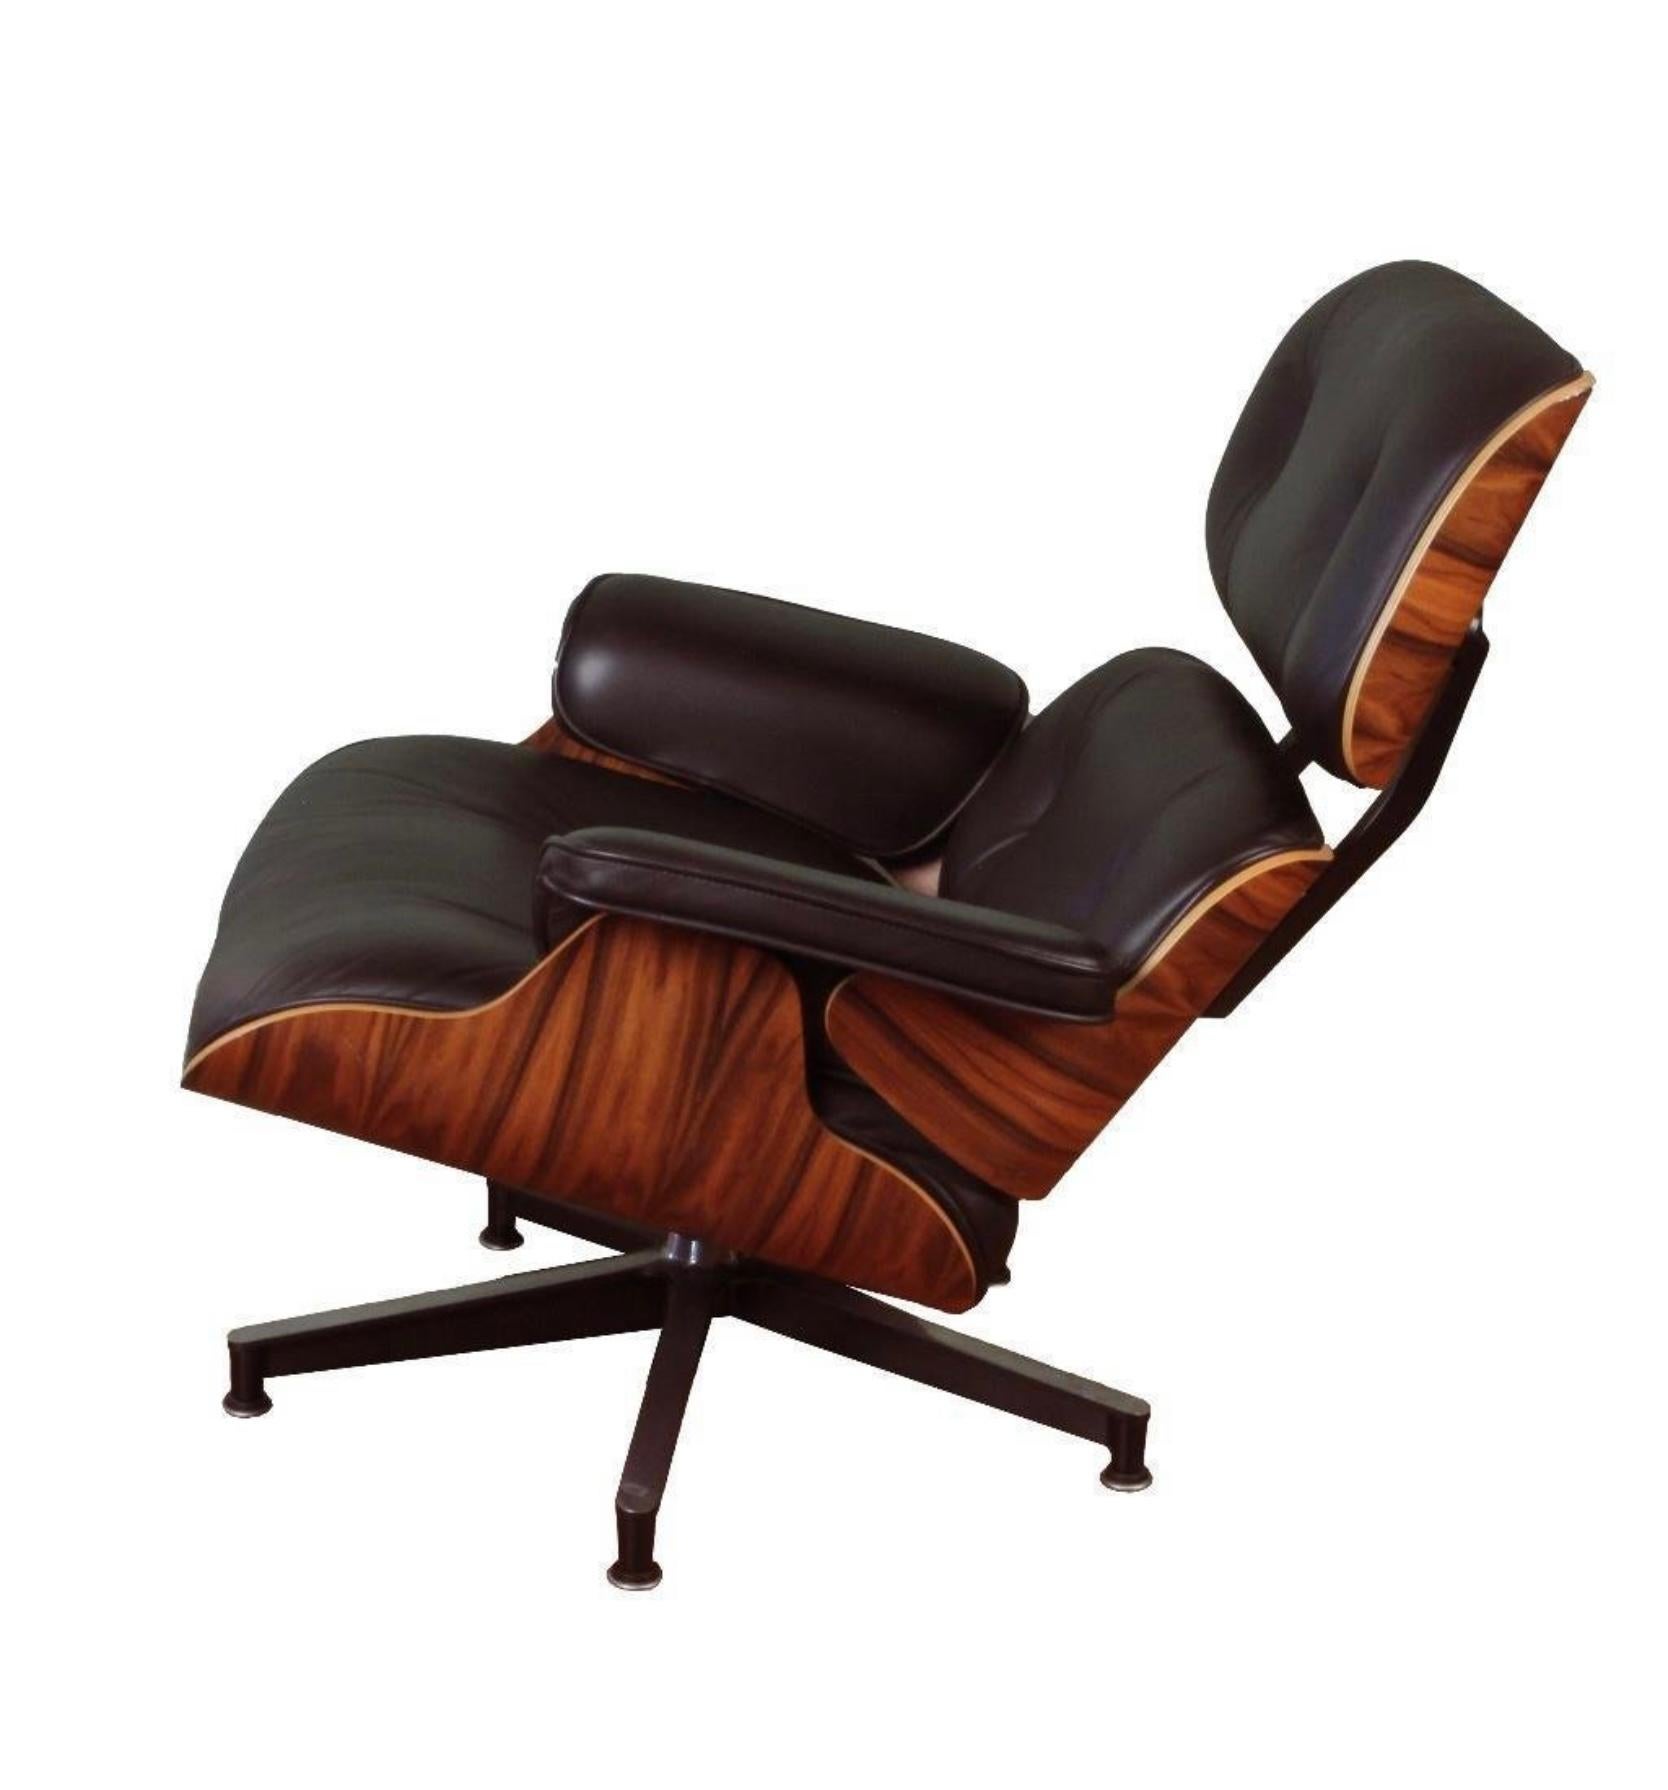 Hand-Crafted Herman Miller Eames 670/71 Lounge Chair and Ottoman in Palisander